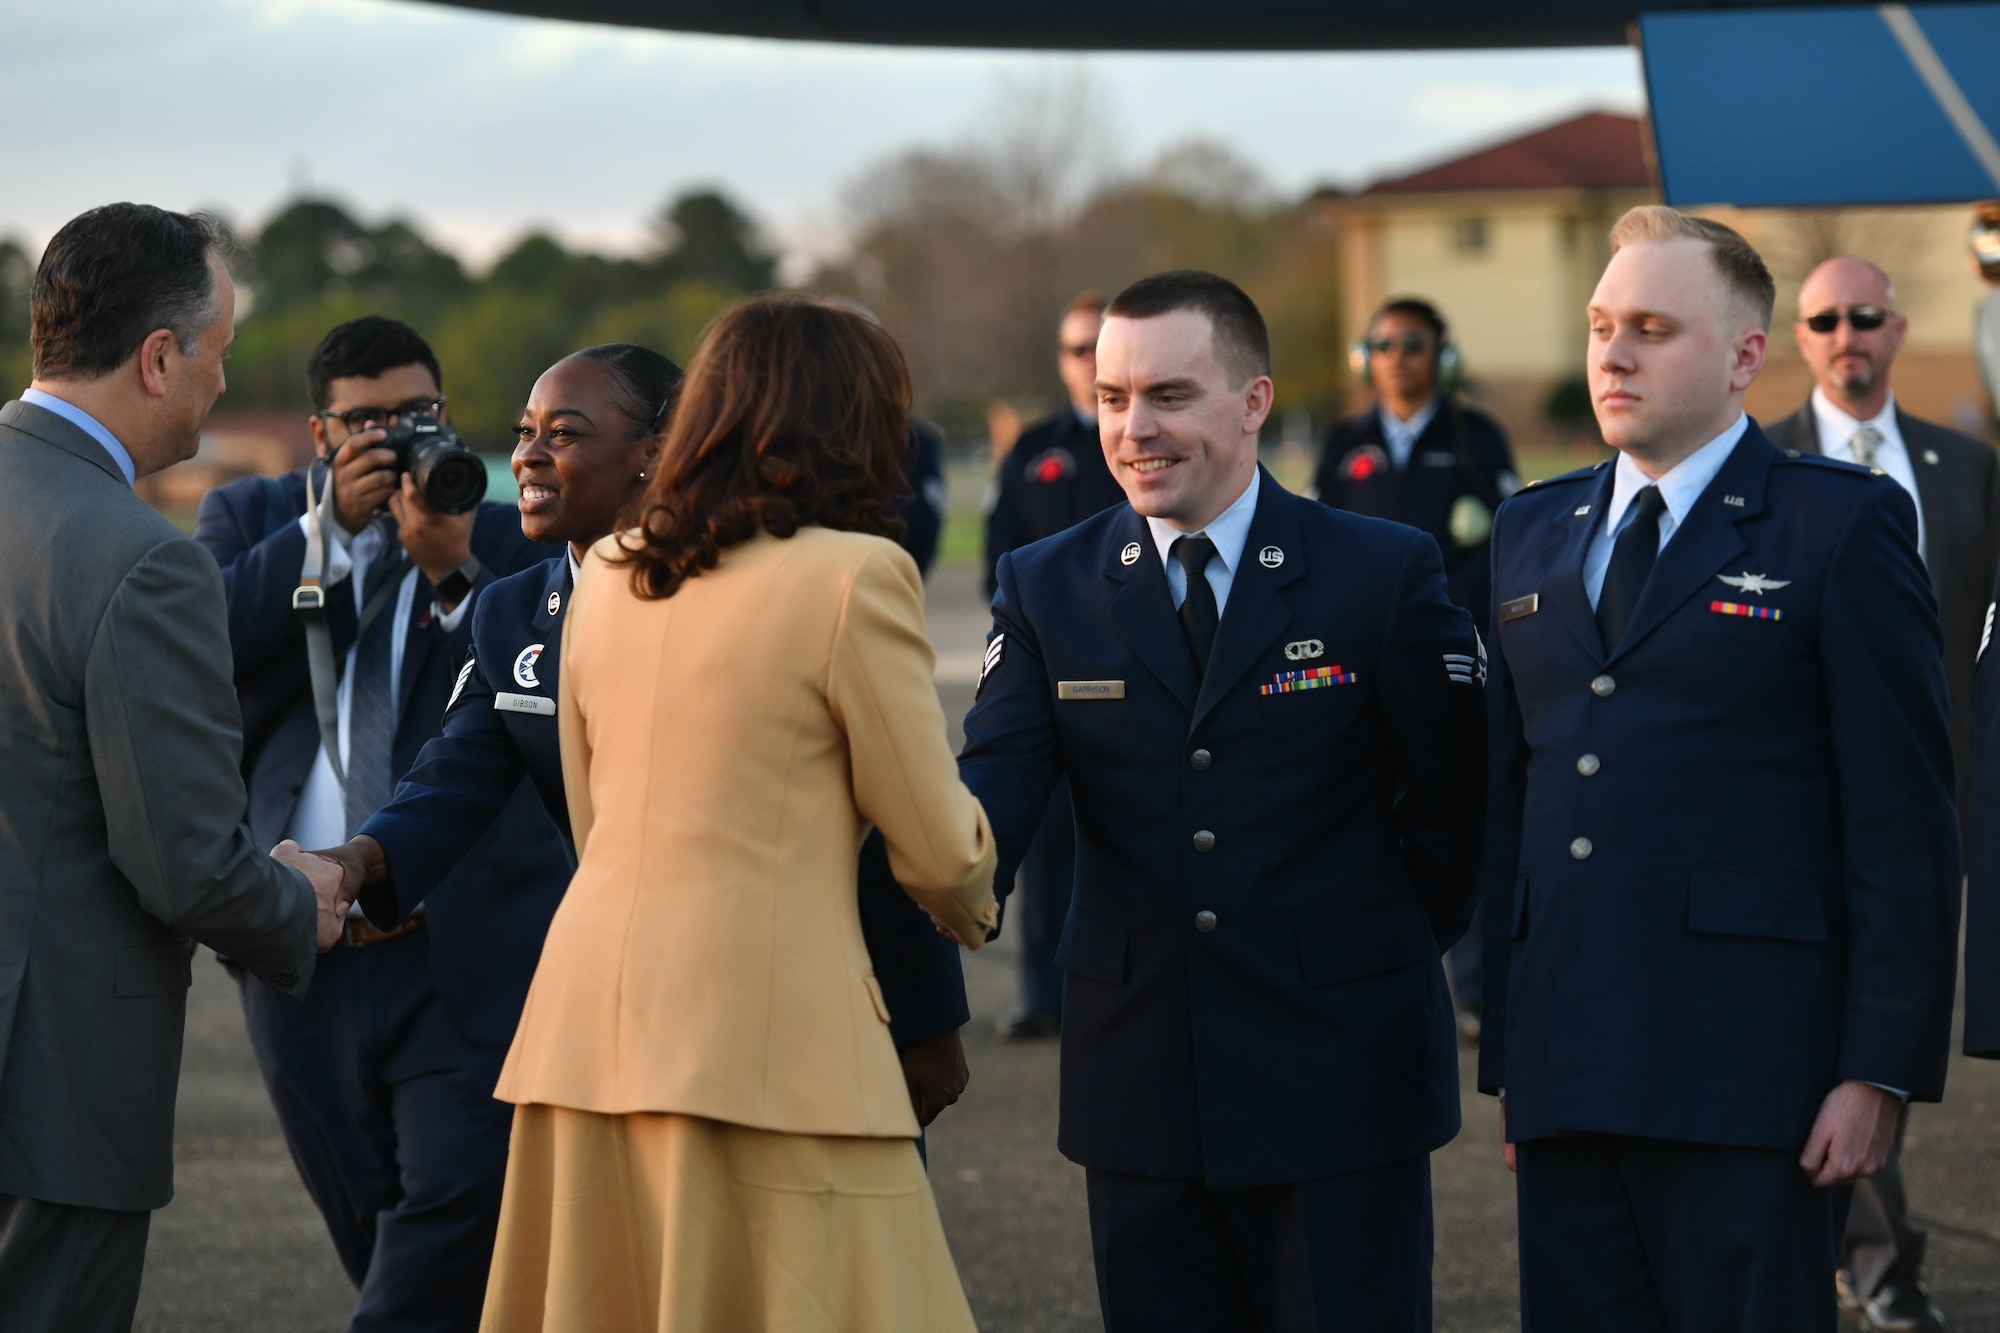 Vice President Kamala Harris shakes hands with Senior Airman David Garrison, an air traffic controller assigned to the 42nd Operations Support Squadron, on Maxwell Air Force Base, Alabama, March 6, 2022. Harris recognized 10 individuals who were nominated as exemplary Airmen. (U.S. Air Force photo by Senior Airman Jackson Manske)